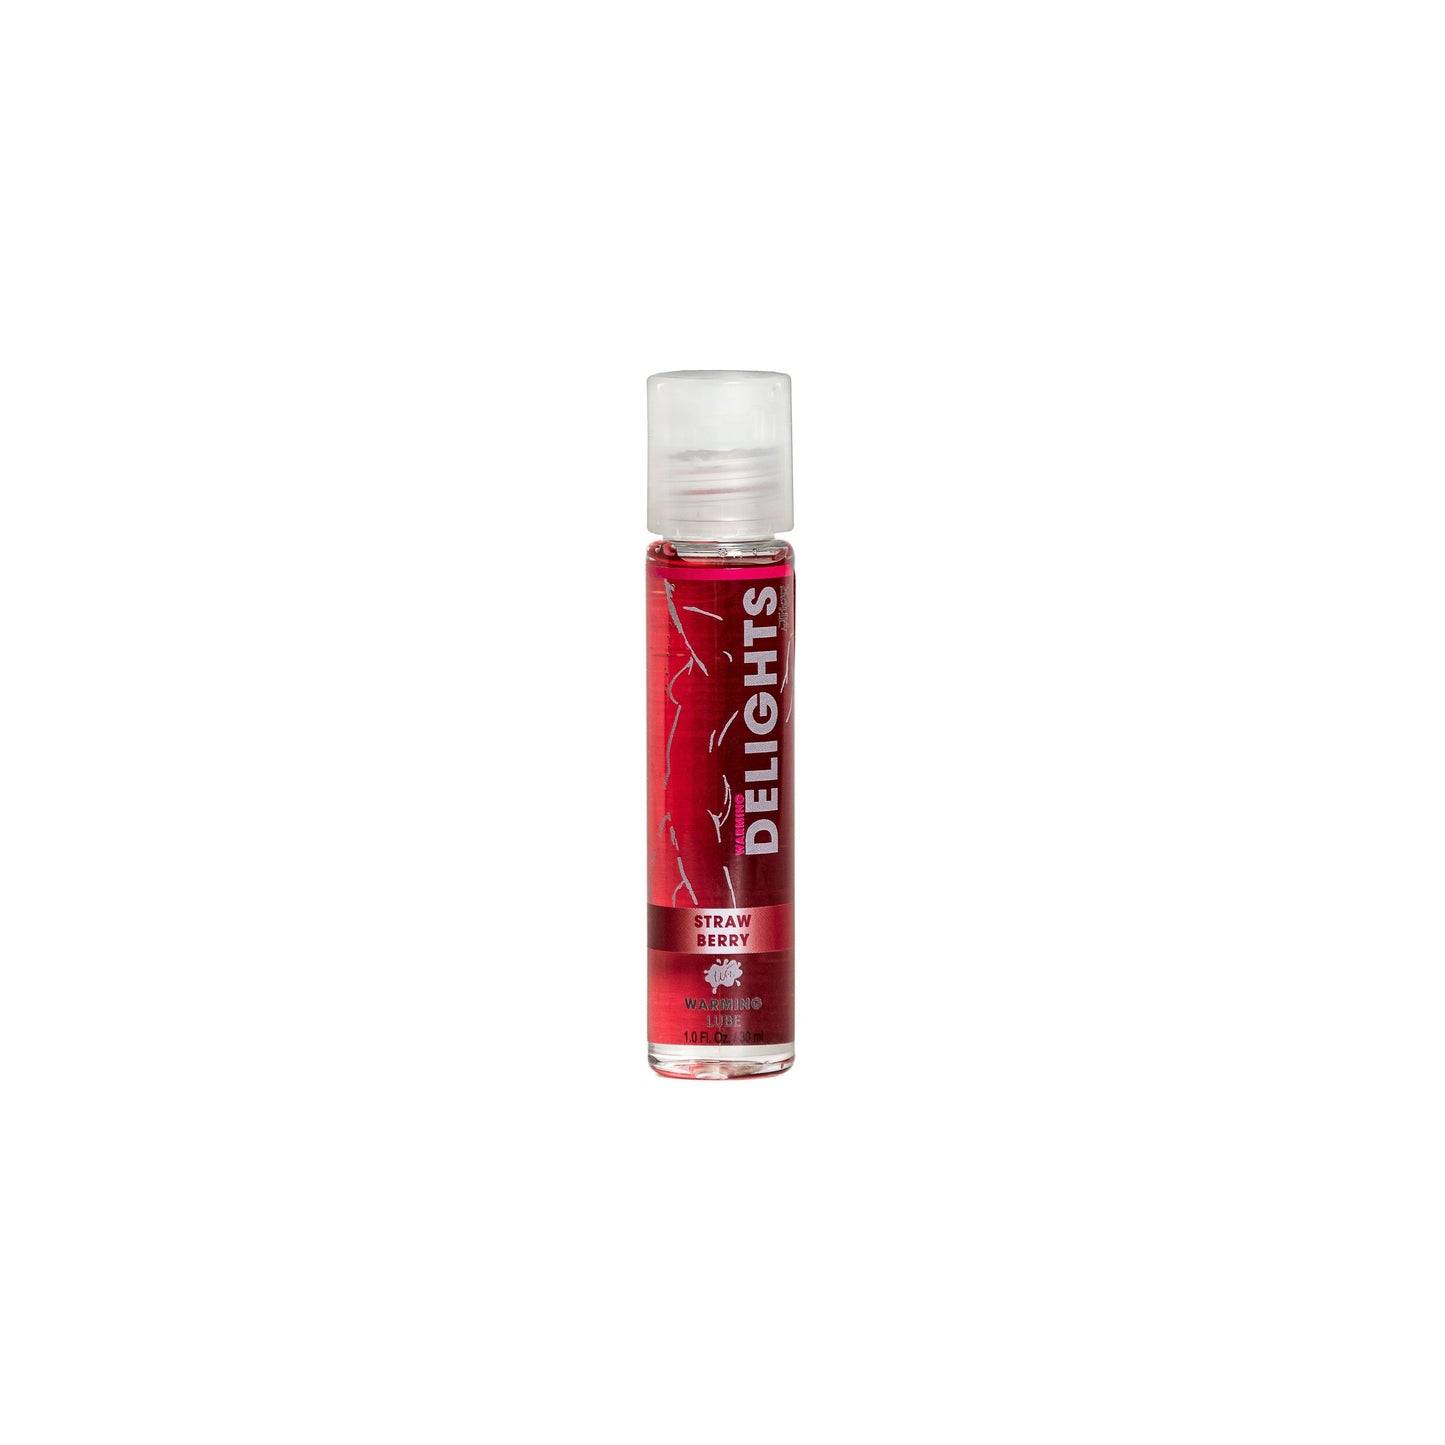 Wet Warming Fun Flavors - Strawberry - 4 in 1 Lubricant 1 Oz